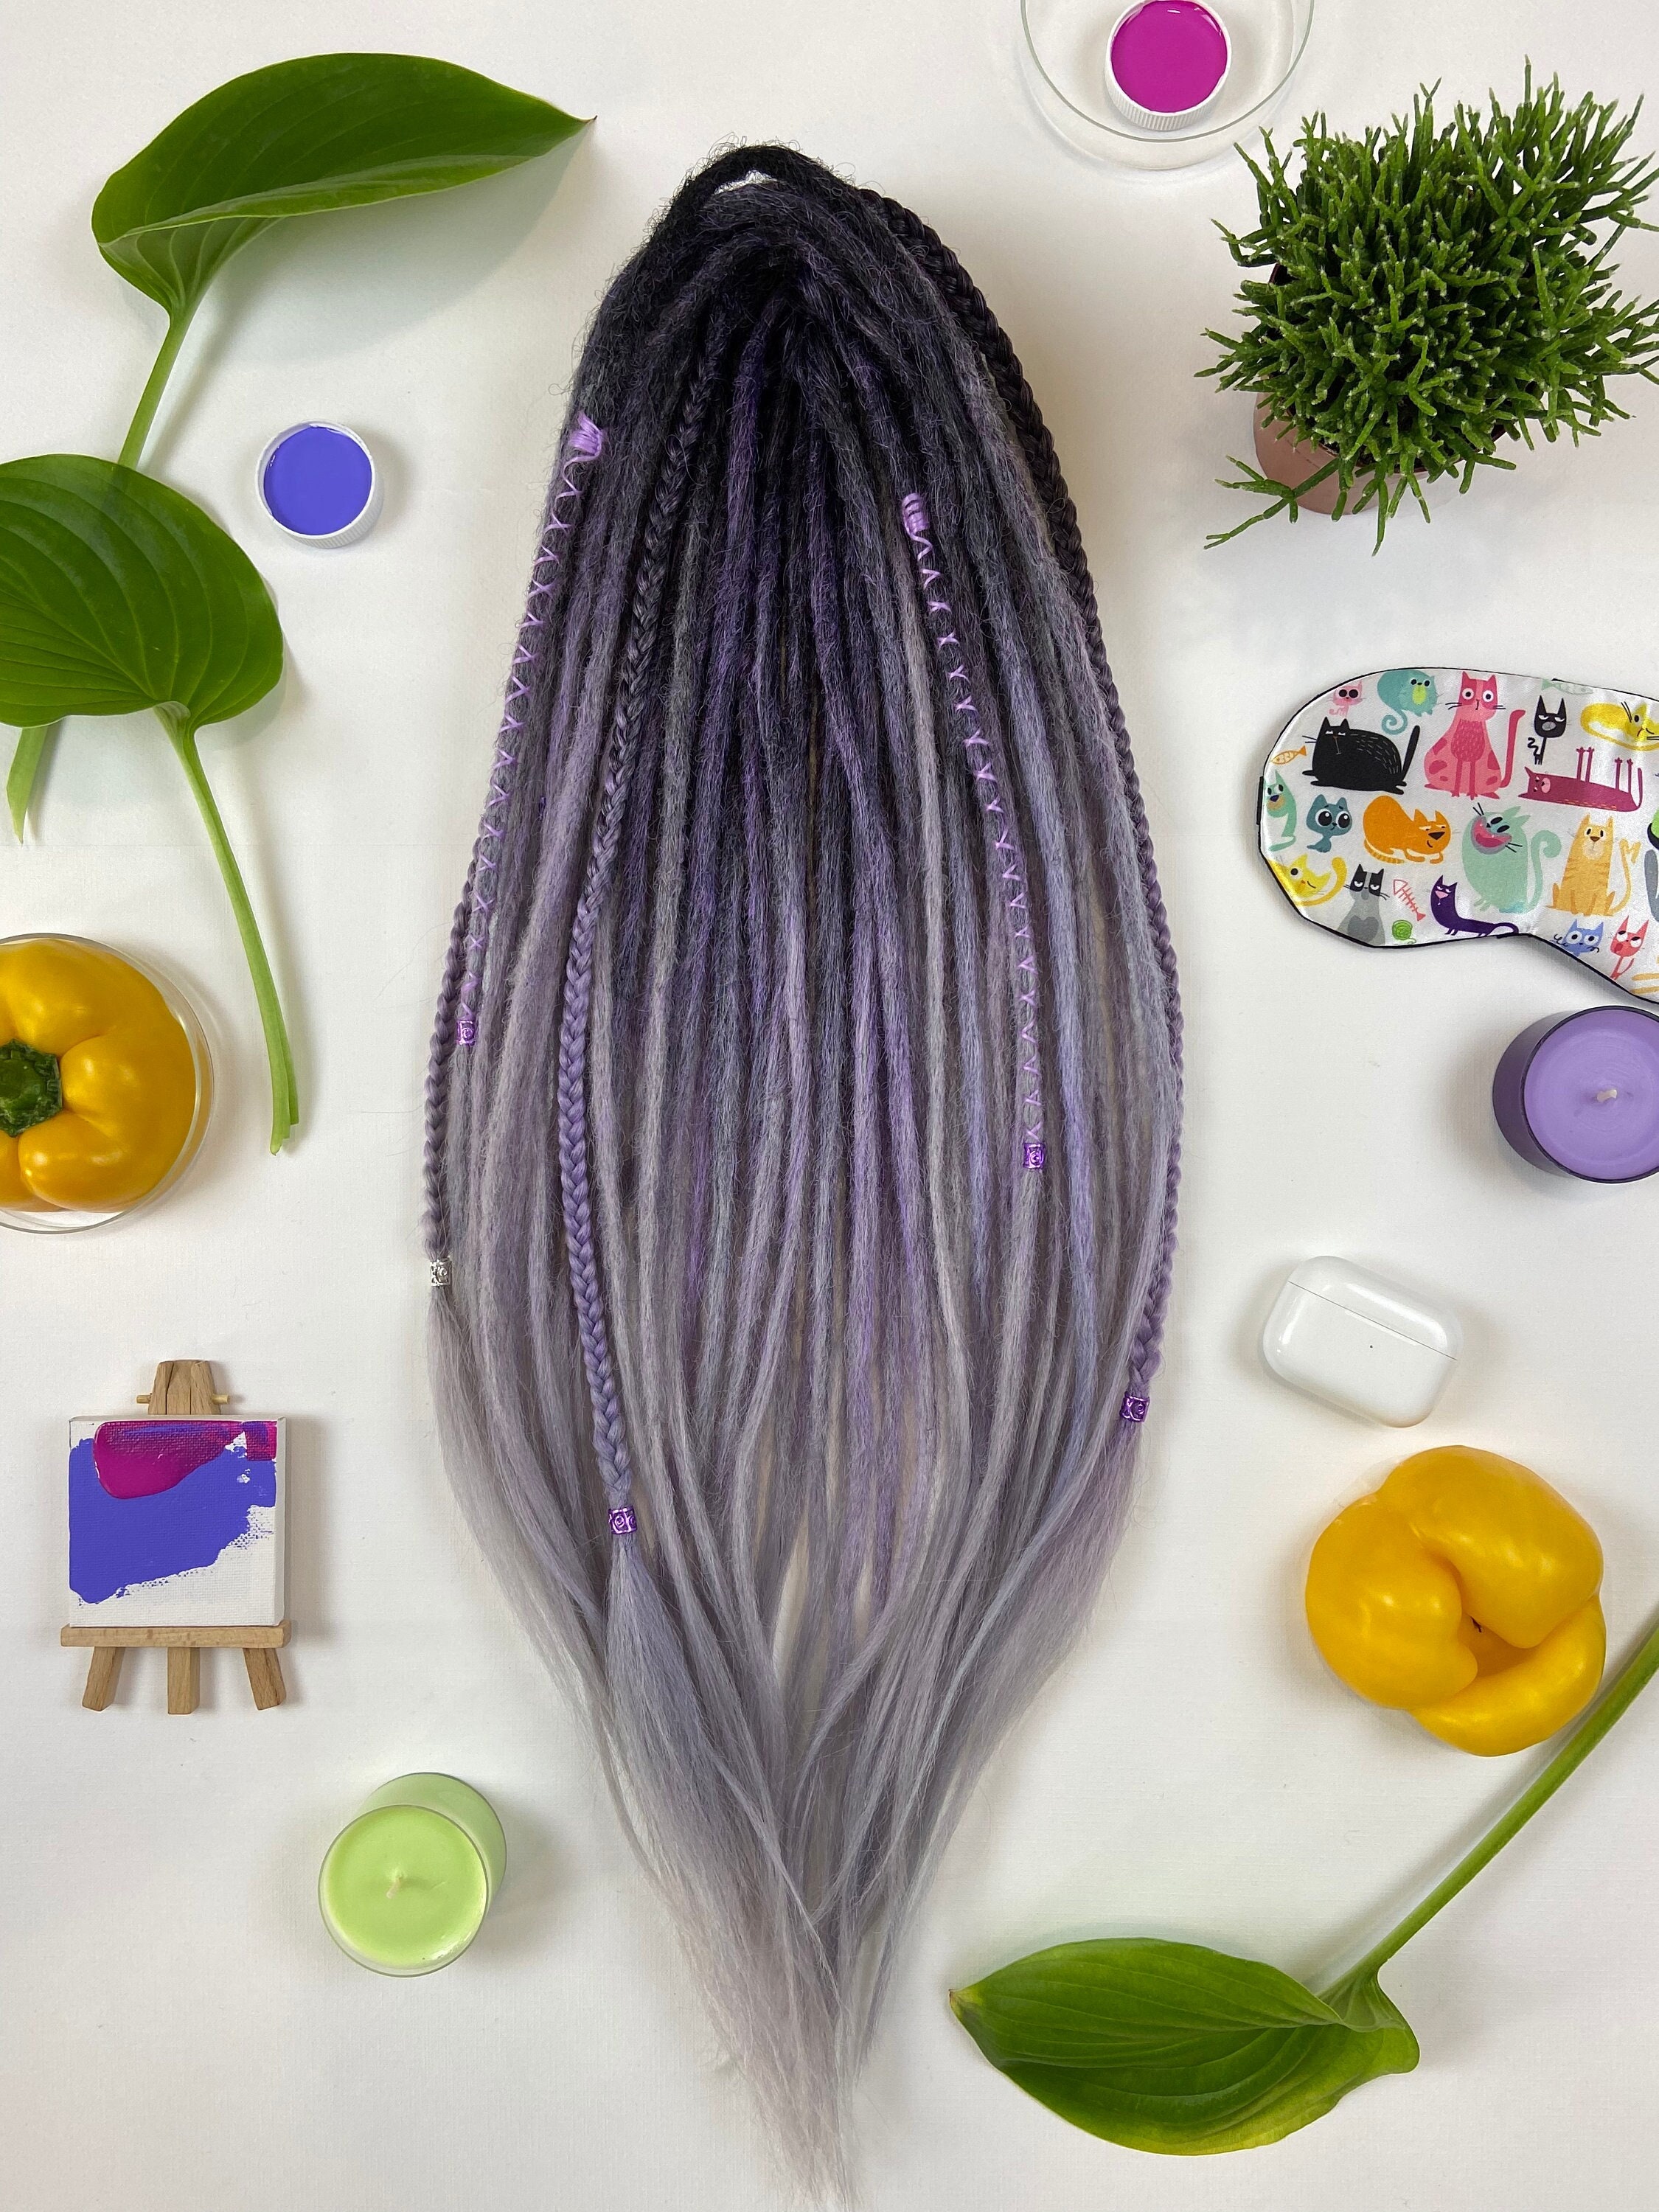 Dark Lavender/Rich Dark Ombre Blends Smoothly With An Ashy Blond Combined Graceful Tones